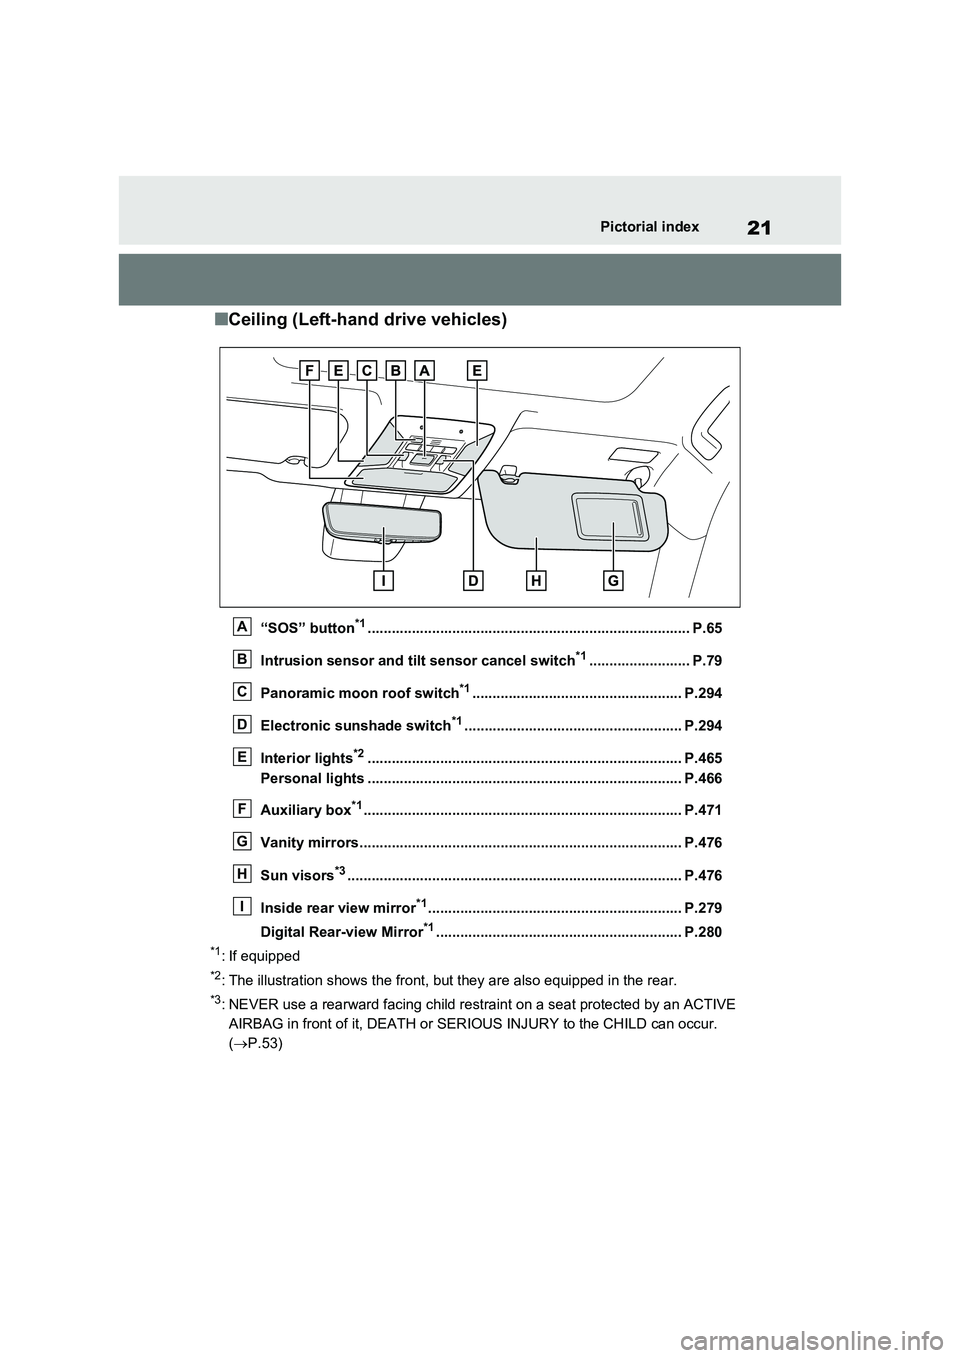 TOYOTA VERSO S 2011  Owners Manual 21Pictorial index
■Ceiling (Left-hand drive vehicles)
“SOS” button*1................................................................................ P.65 
Intrusion sensor and tilt sensor cancel